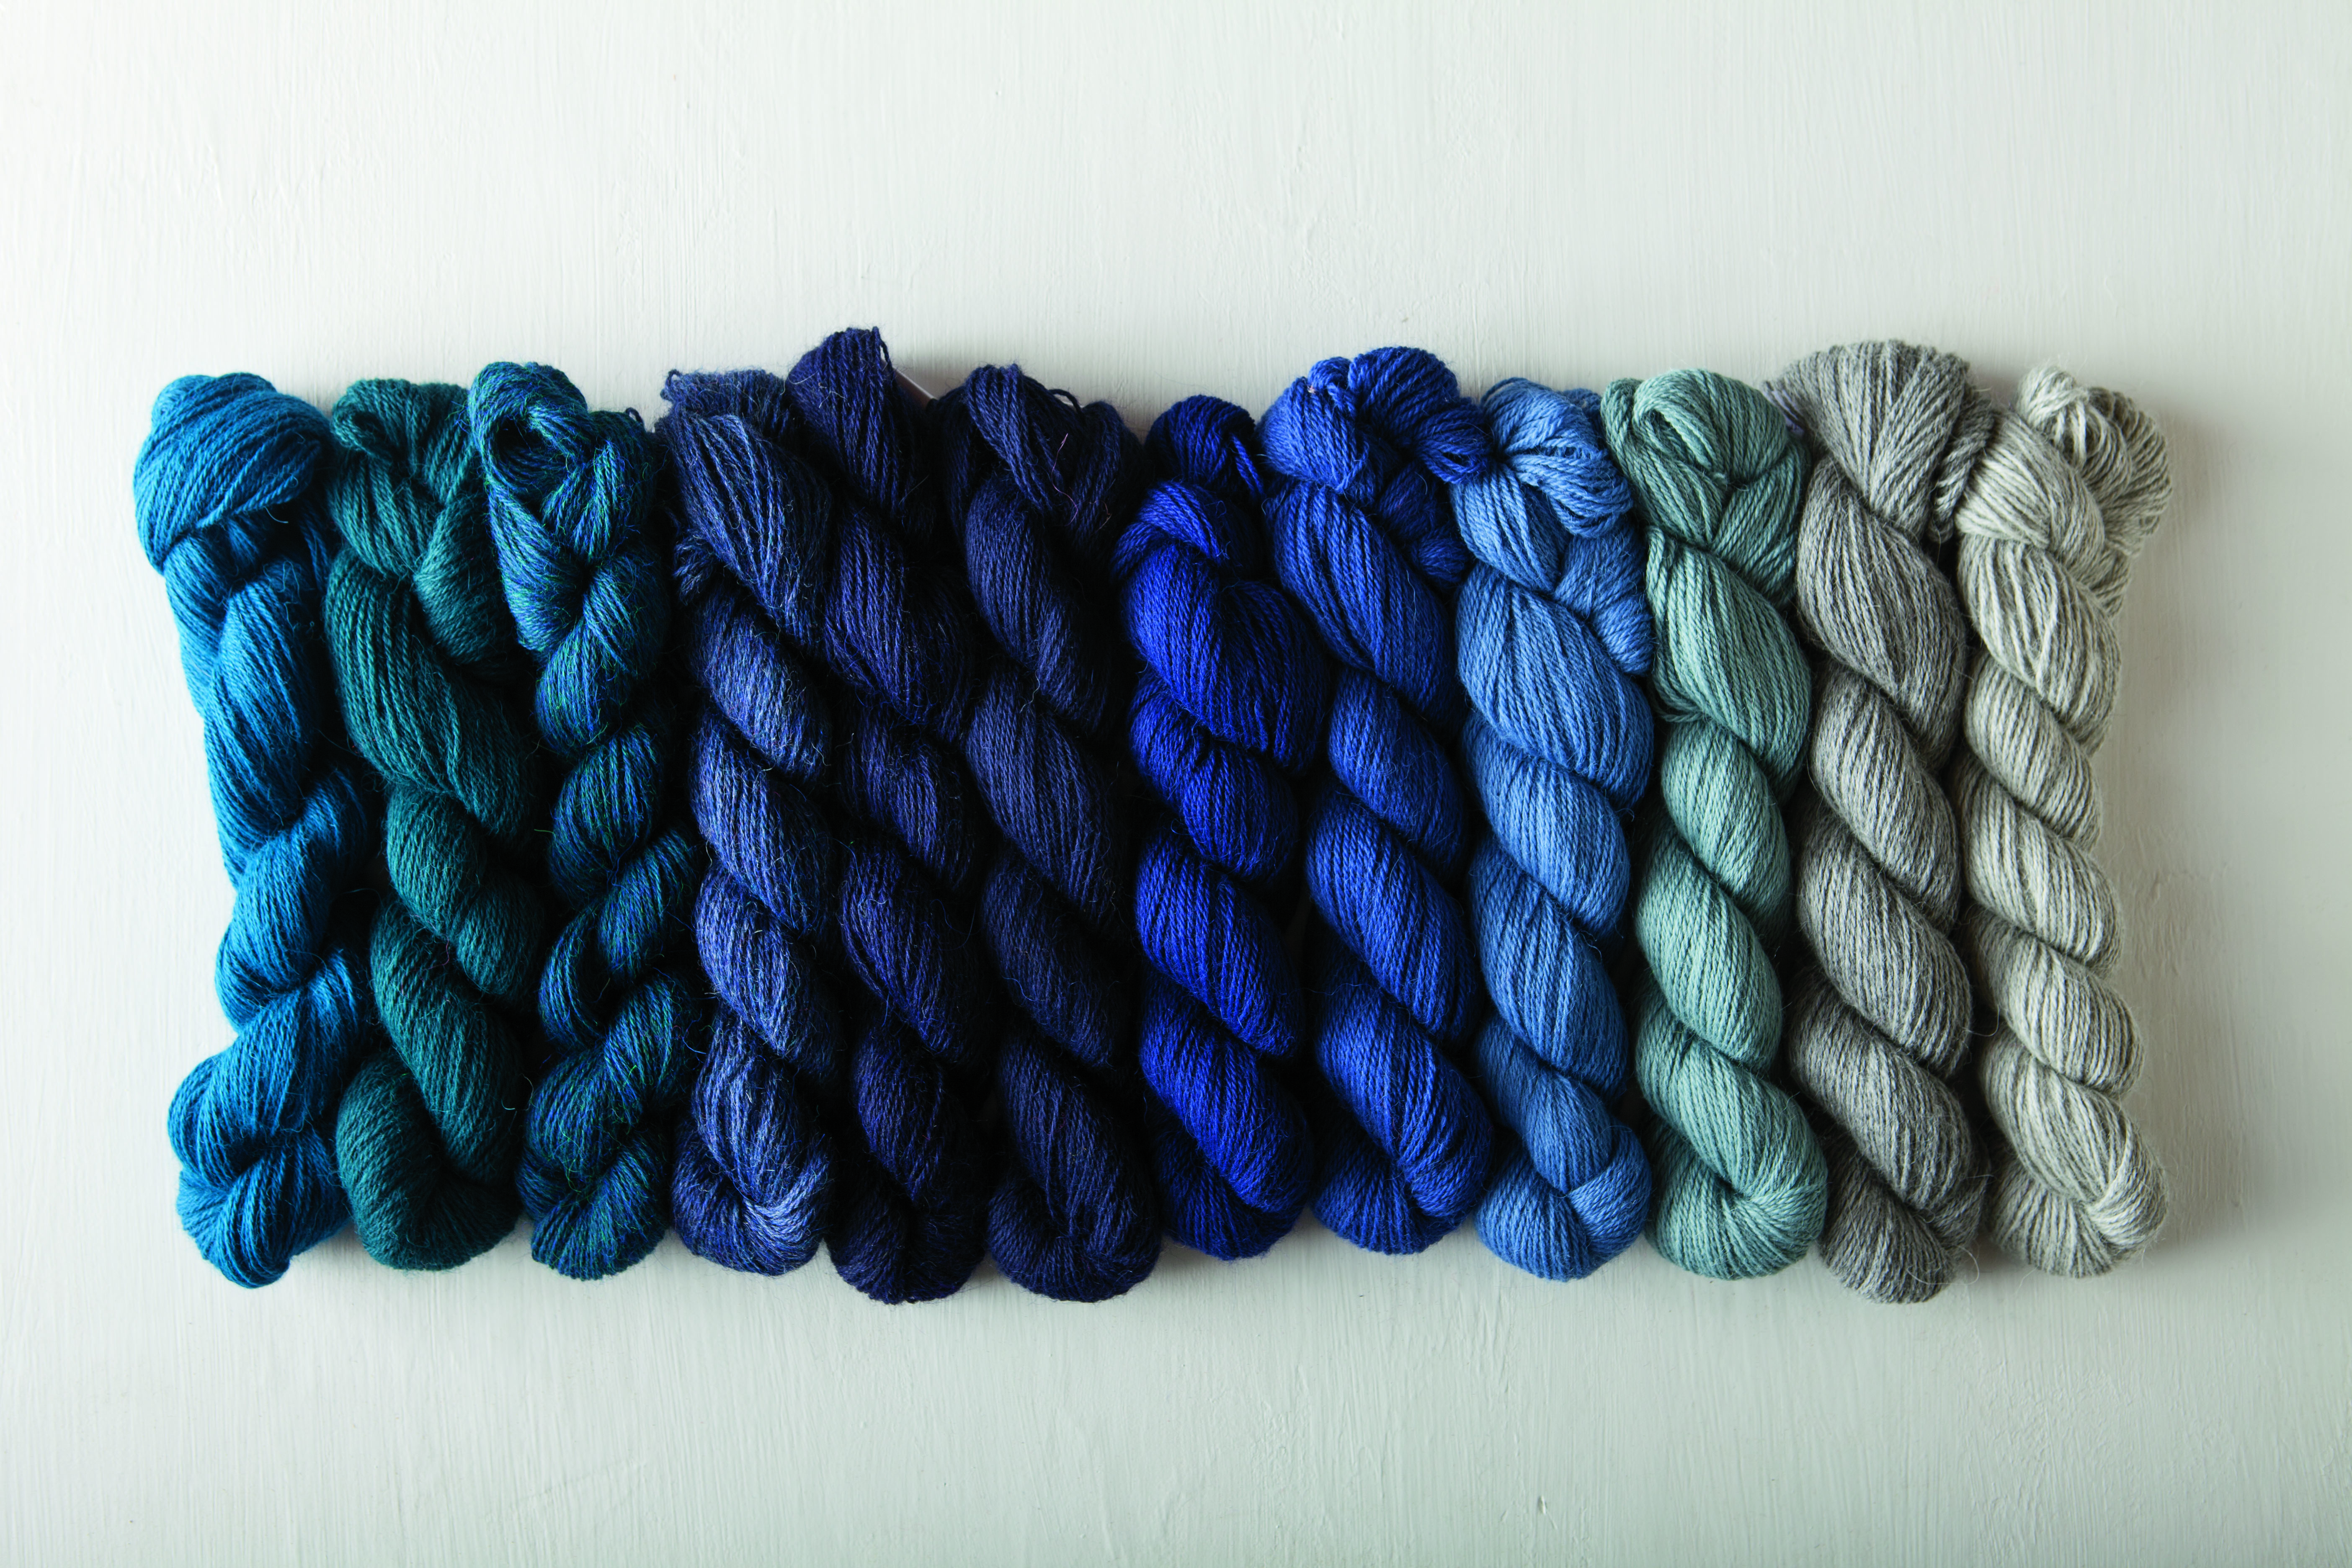 A Different Way to Give Handmade - Gorgeous Yarn